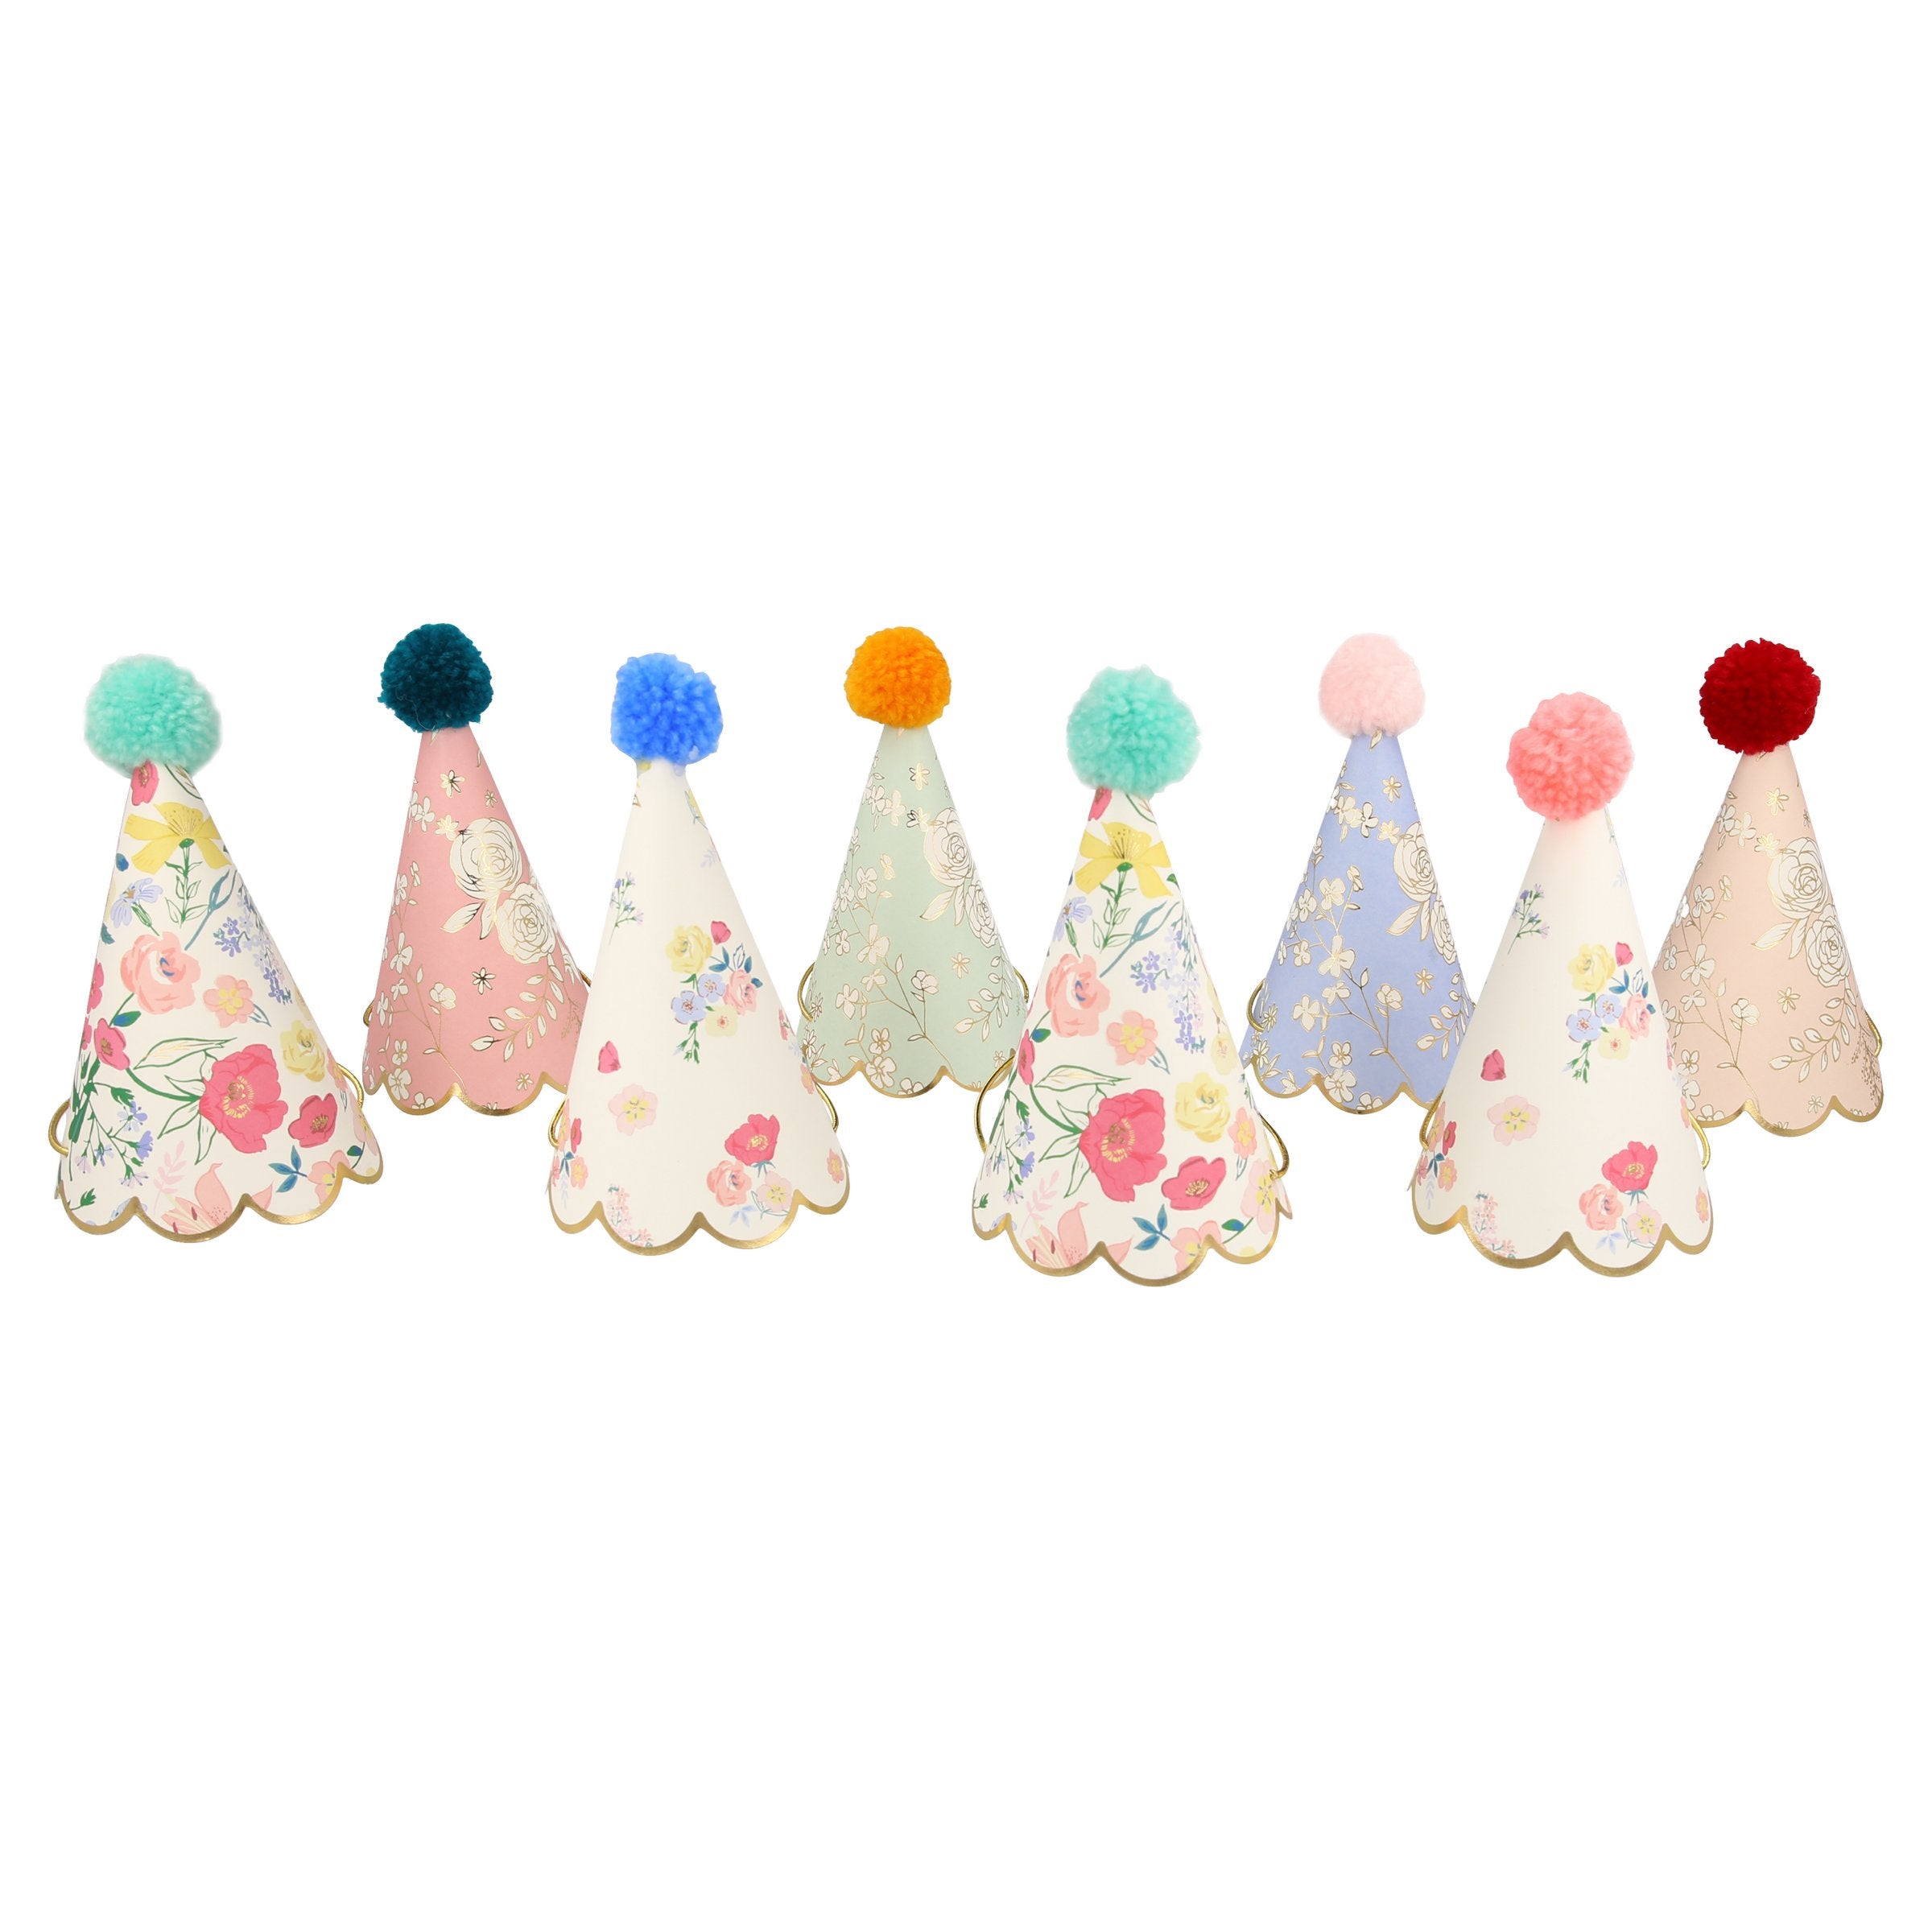 Make your party guests look amazing with our paper hats with floral designs and bright pompoms.